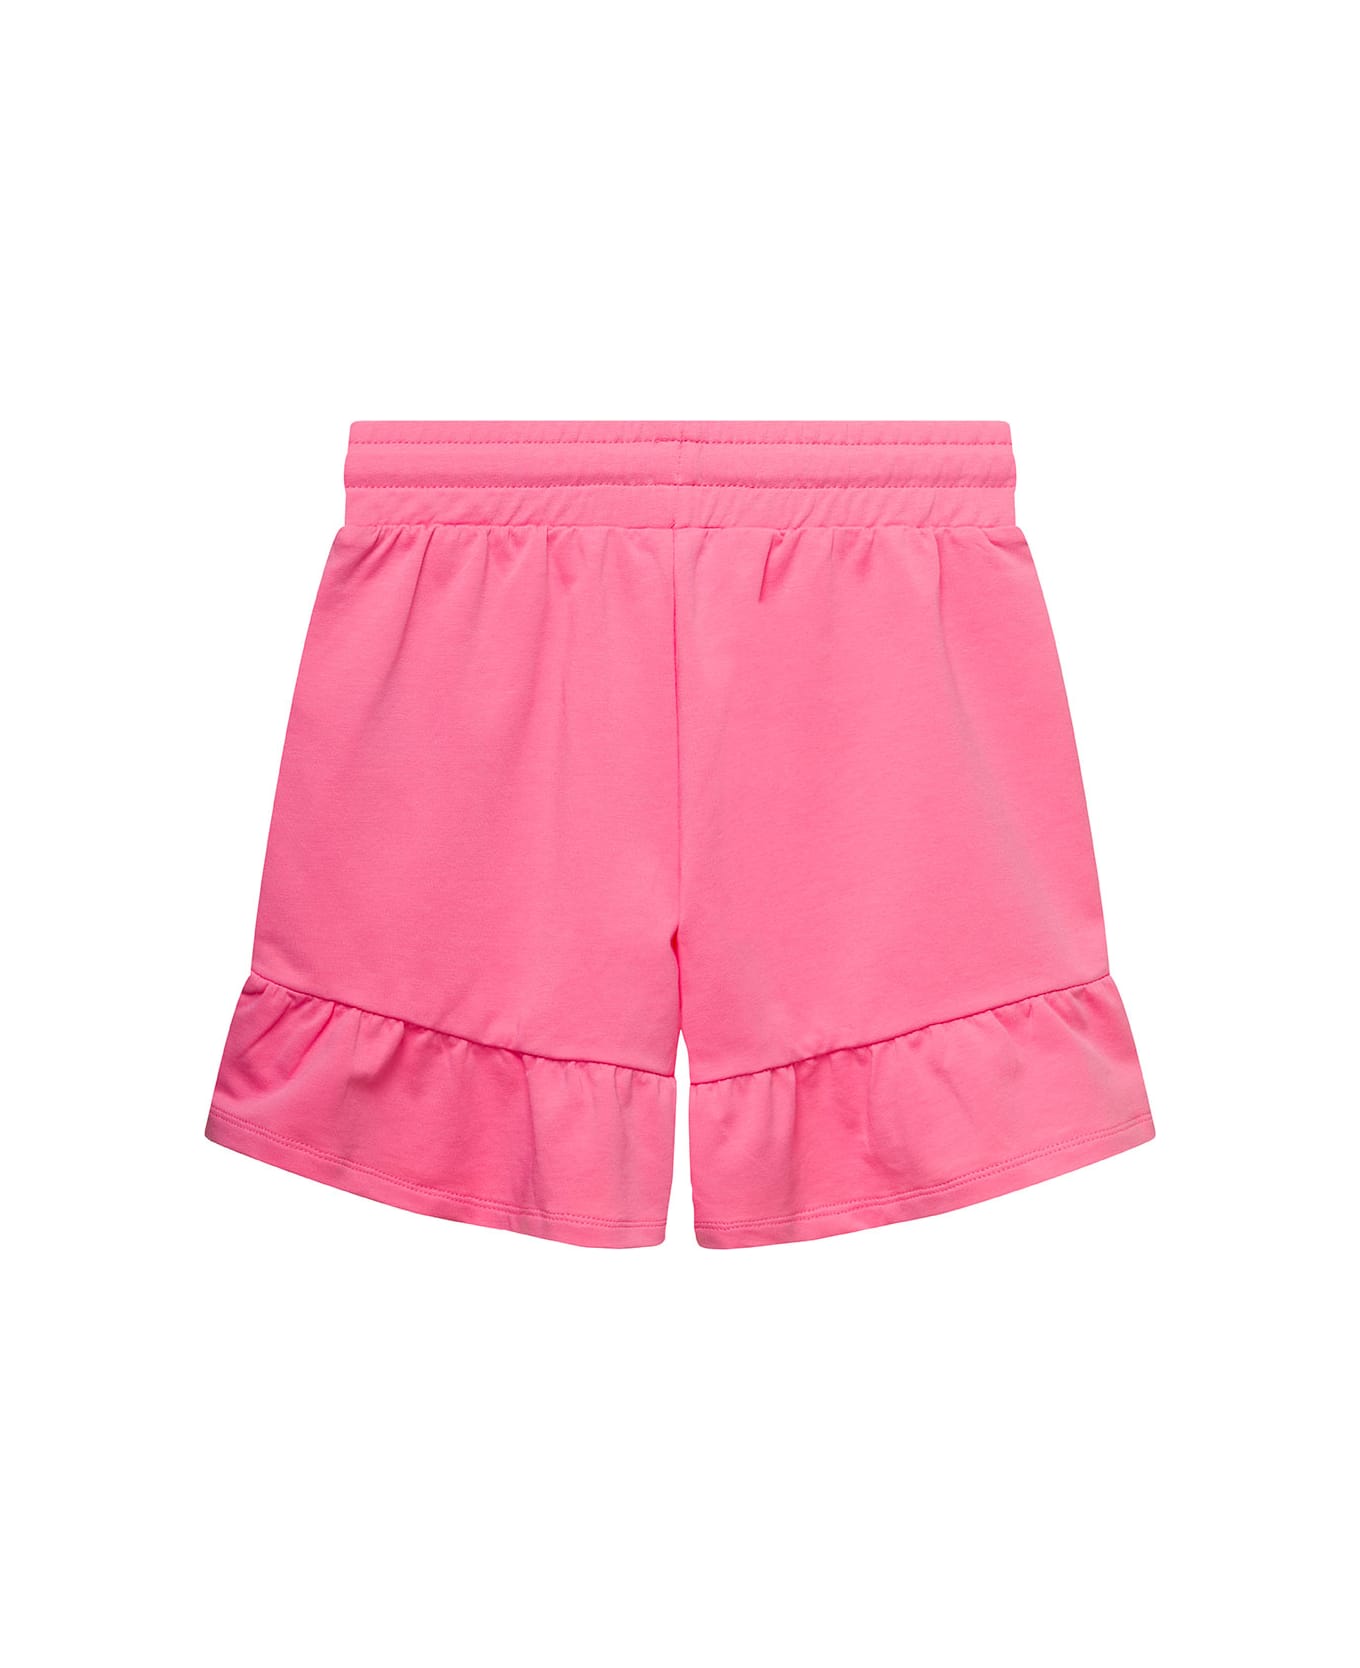 Moschino Pink Shorts With Teddy Bear Print And Frill Trim In Stretch Cotton Girl - Pink